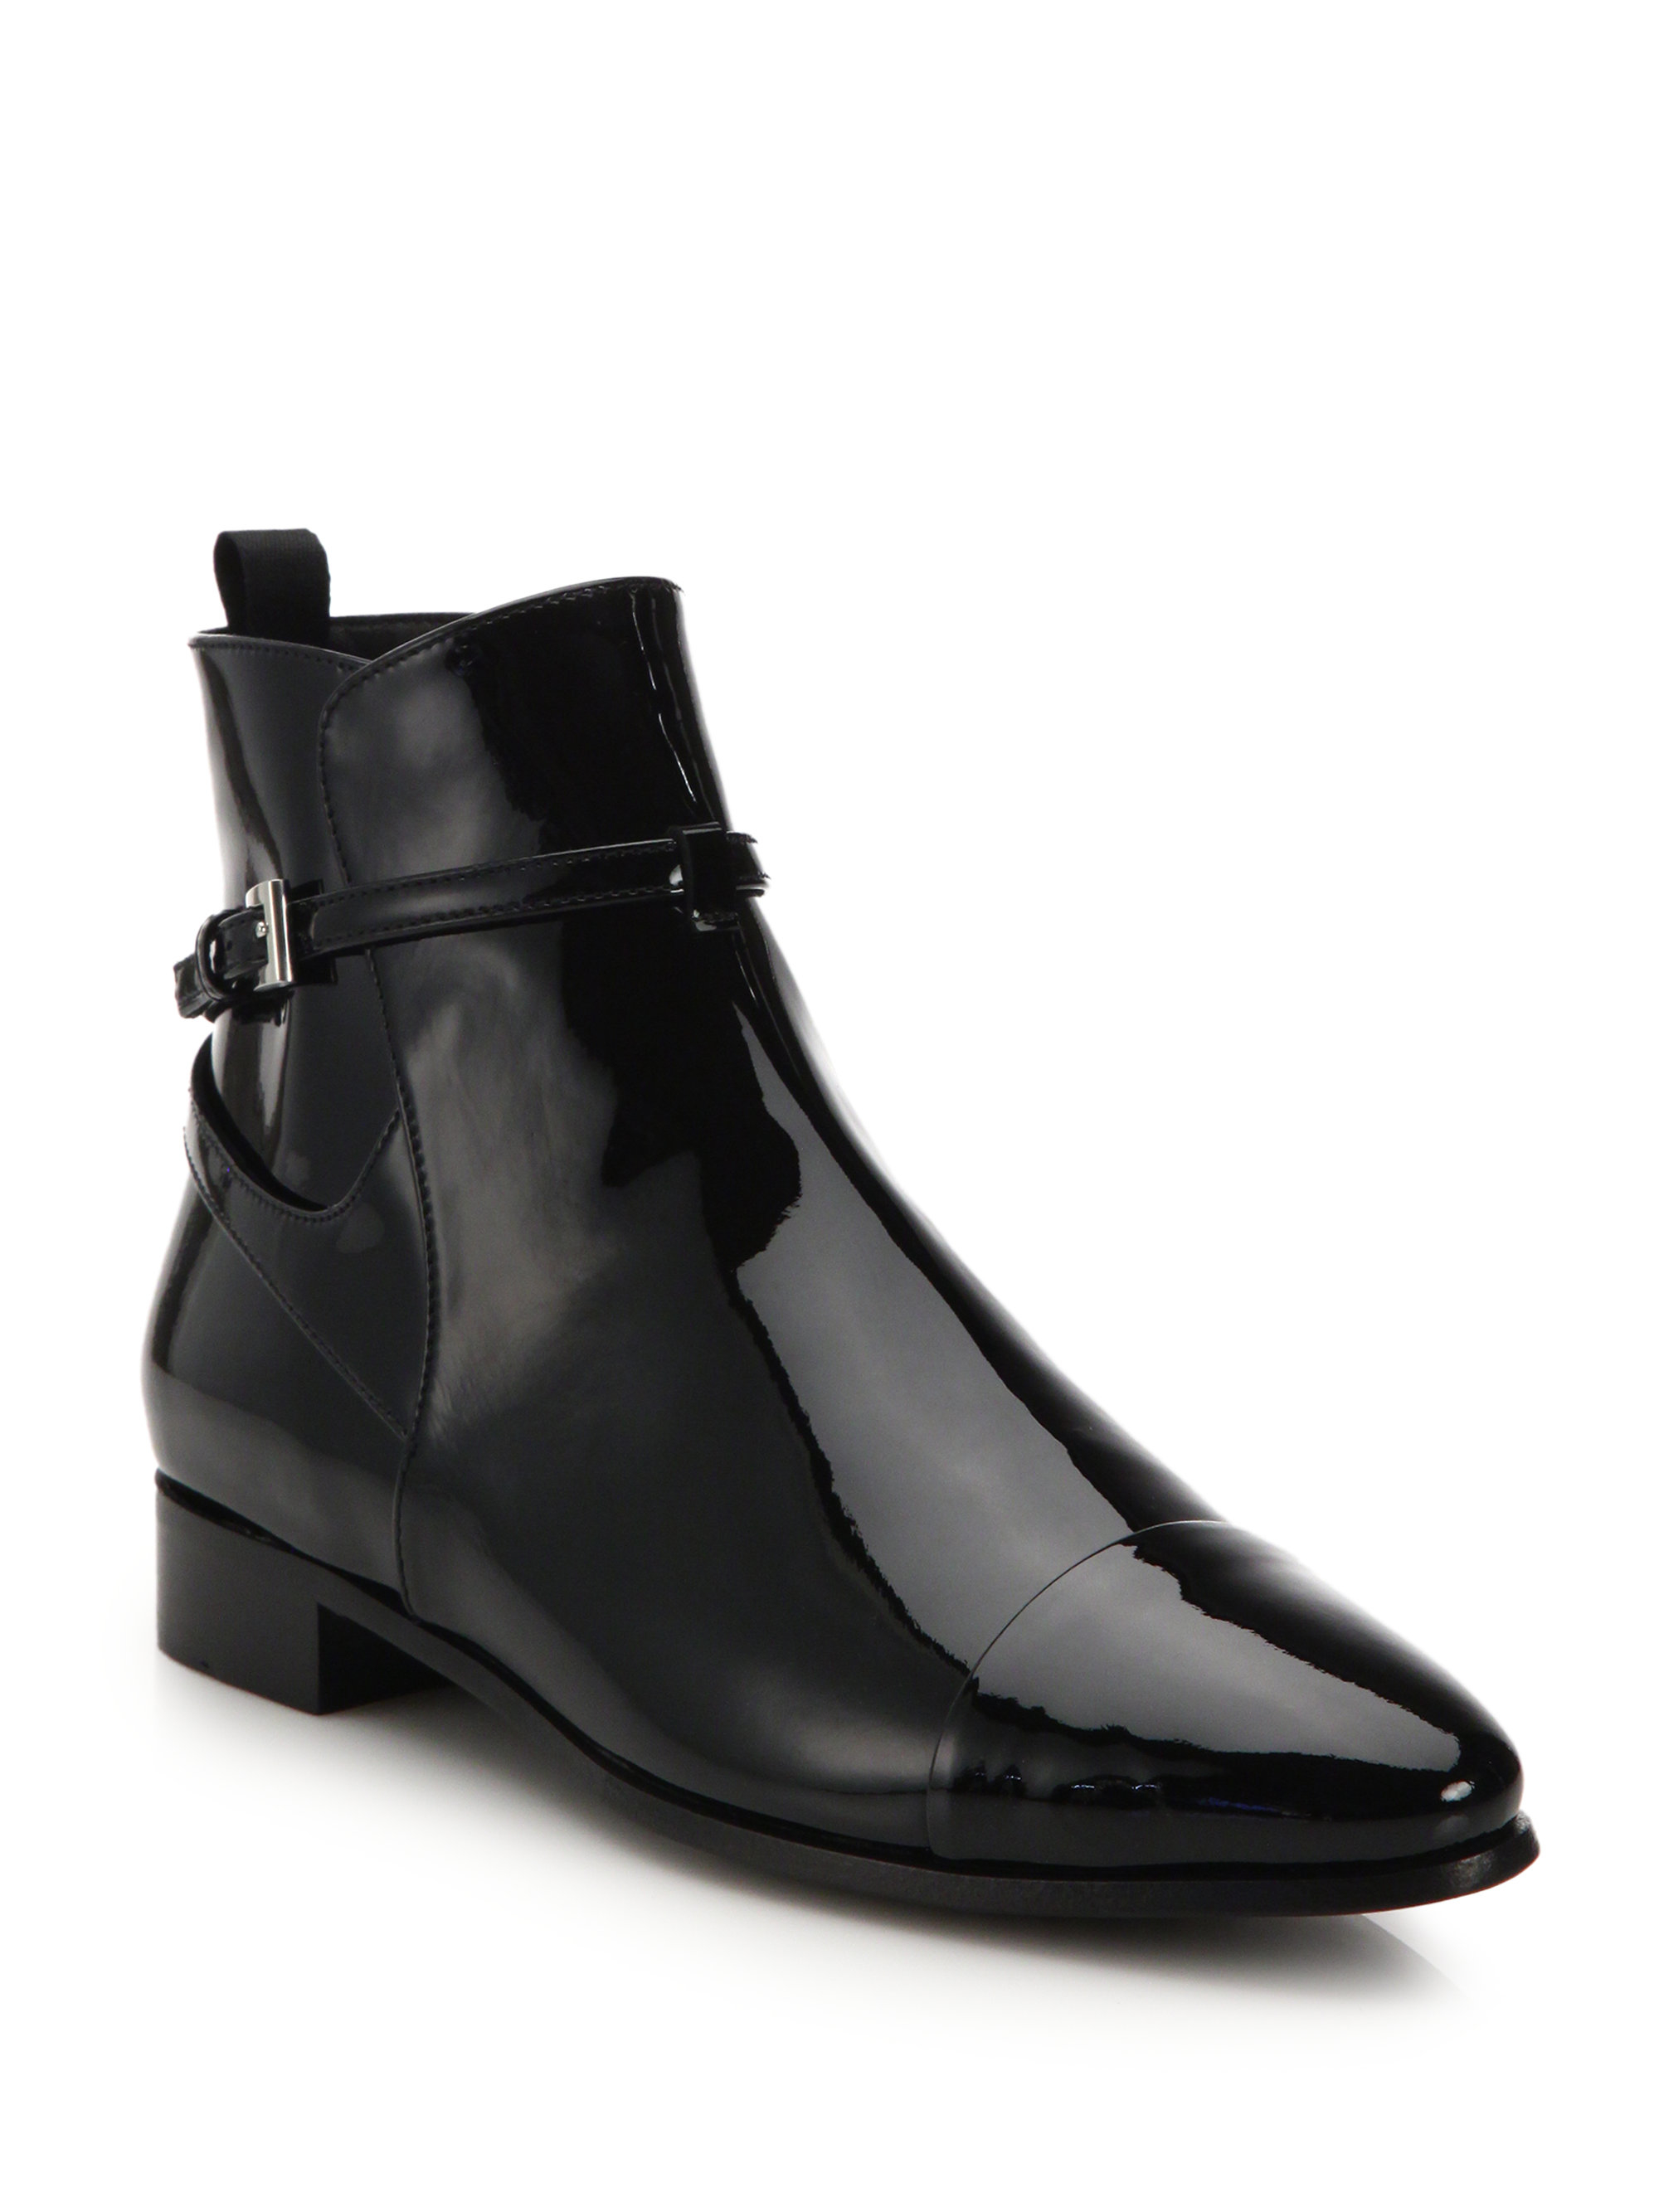 Prada Patent Leather Point-toe Ankle Boots in Black | Lyst